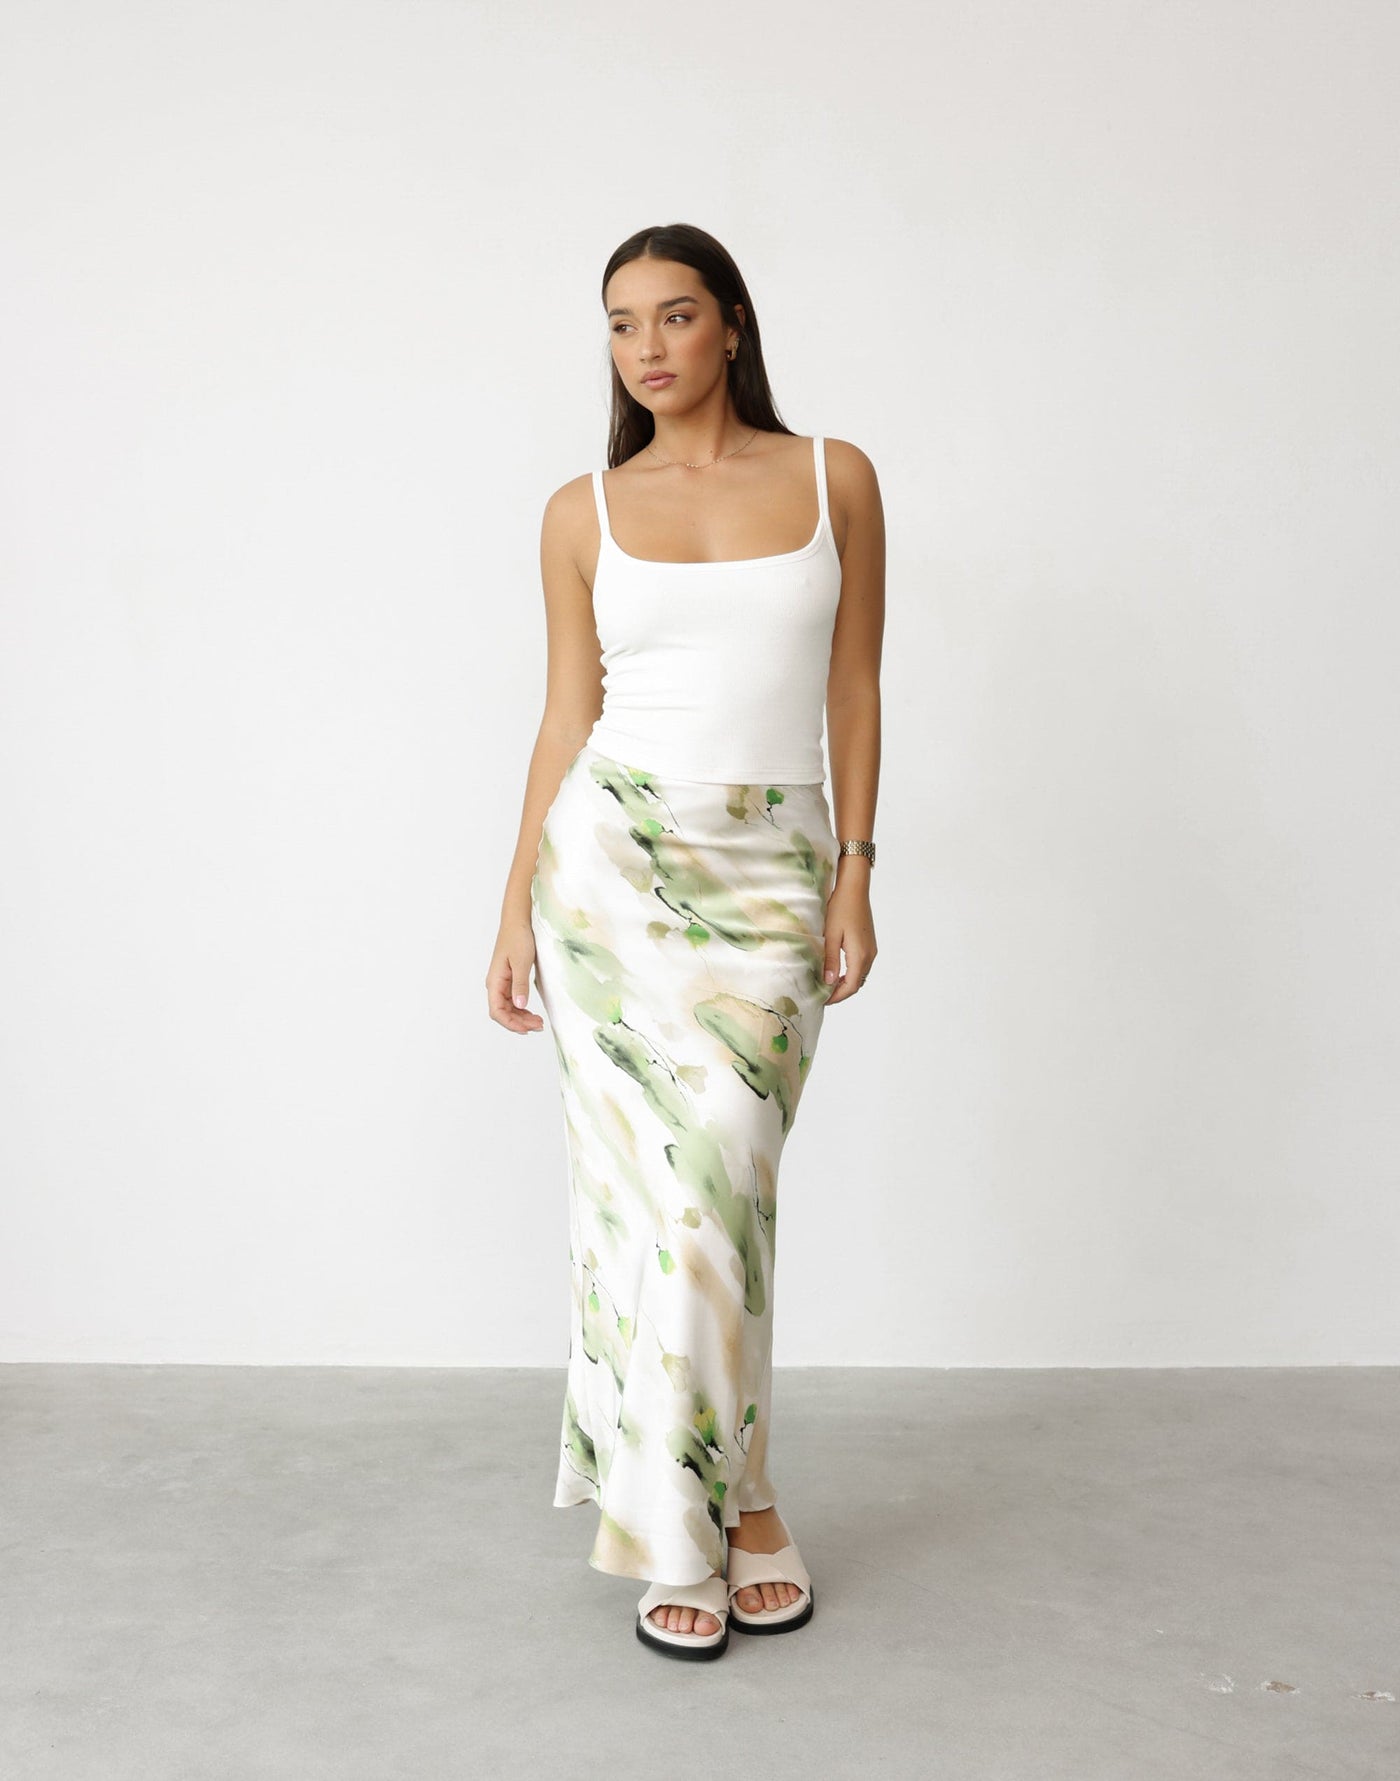 Adoette Maxi Skirt (Water Lily) | CHARCOAL Exclusive - Floral Print Satin Maxi Skirt - Women's Skirt - Charcoal Clothing